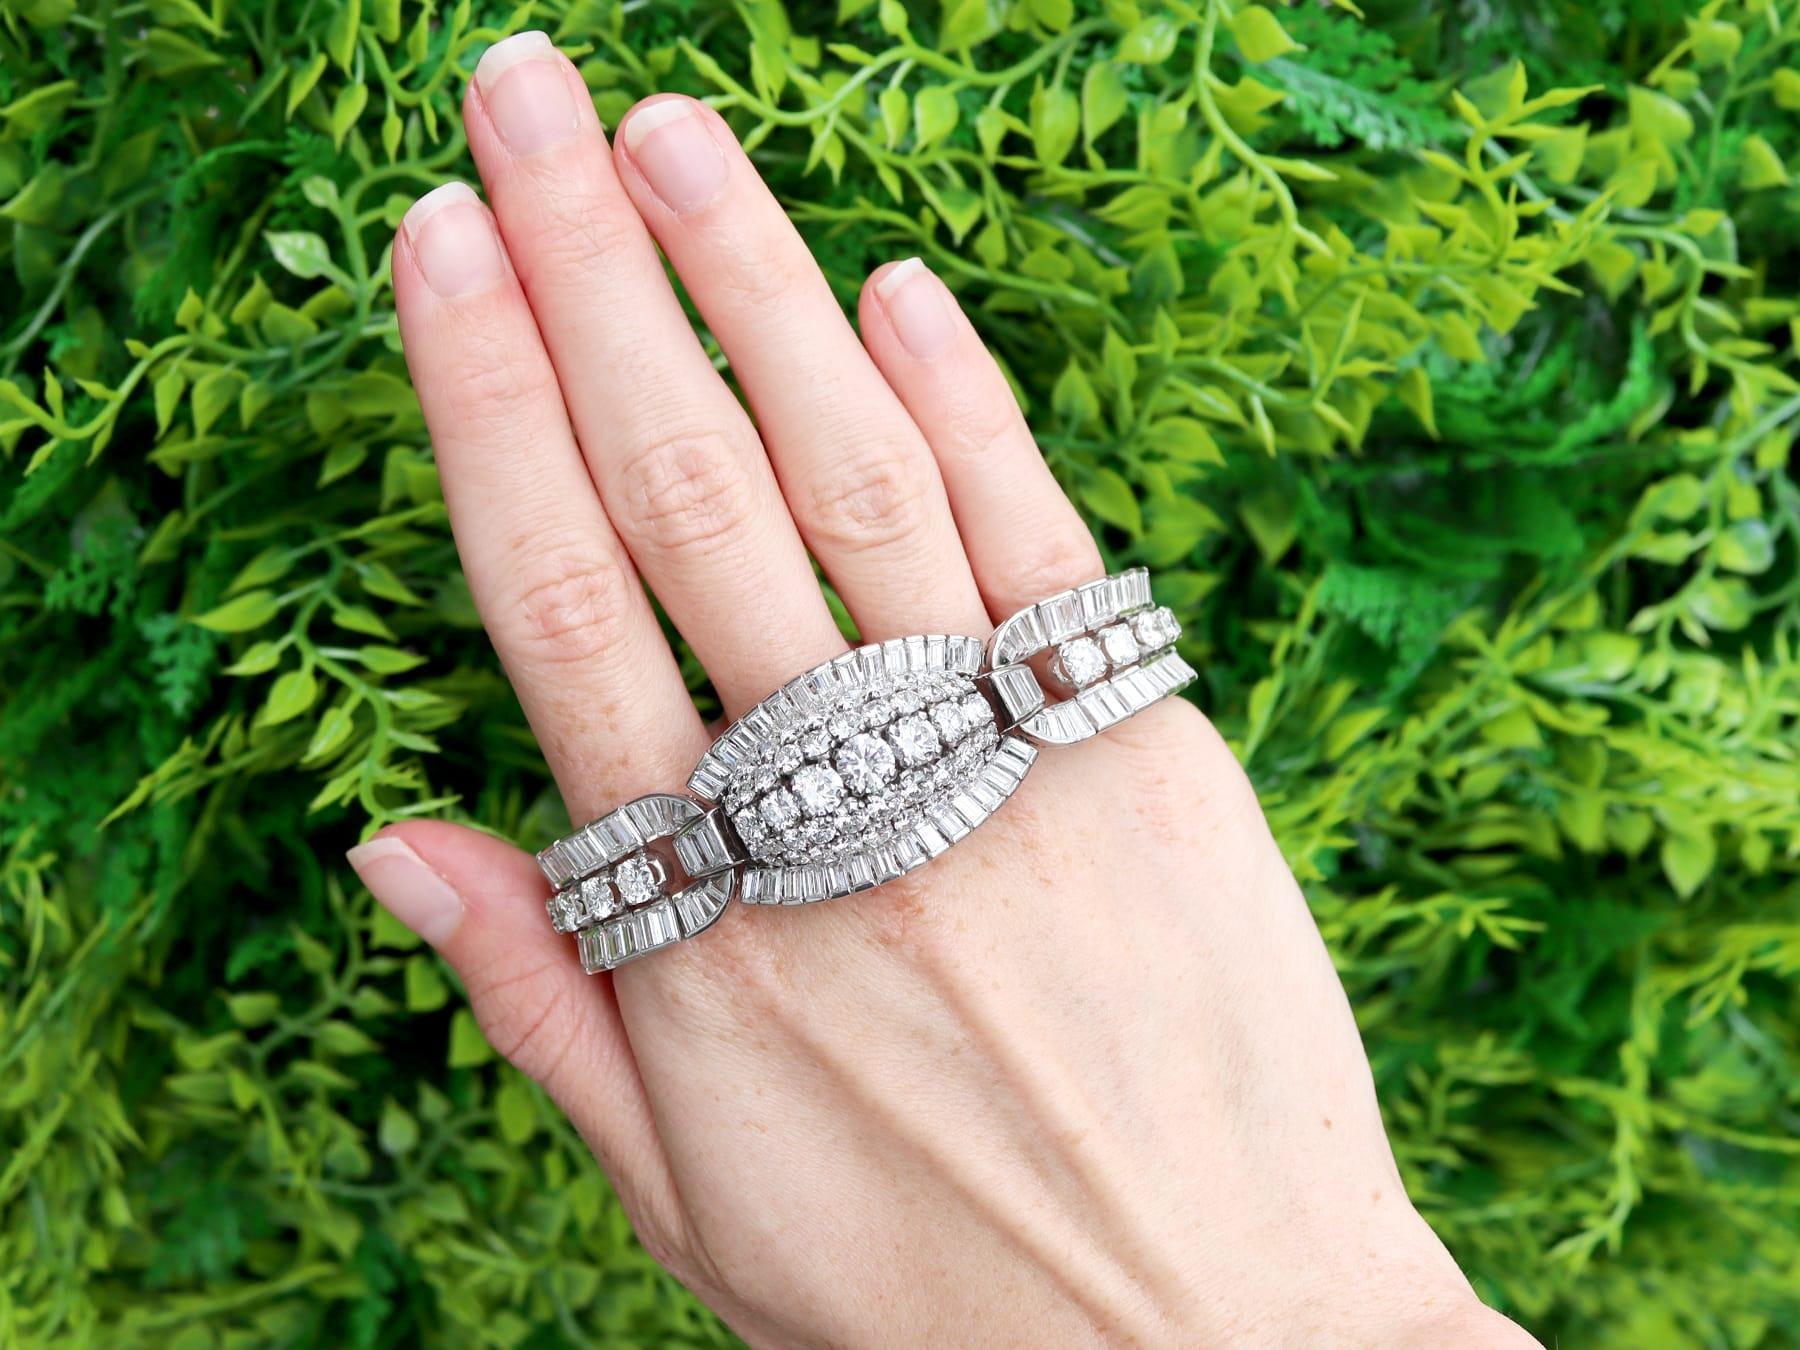 A magnificent, fine and impressive antique art deco 31.54 carat diamond and platinum bracelet; part of our 1920s diamond jewellery collections.

This magnificent, fine and impressive antique 1920s Art Deco bracelet has been crafted in platinum.

The